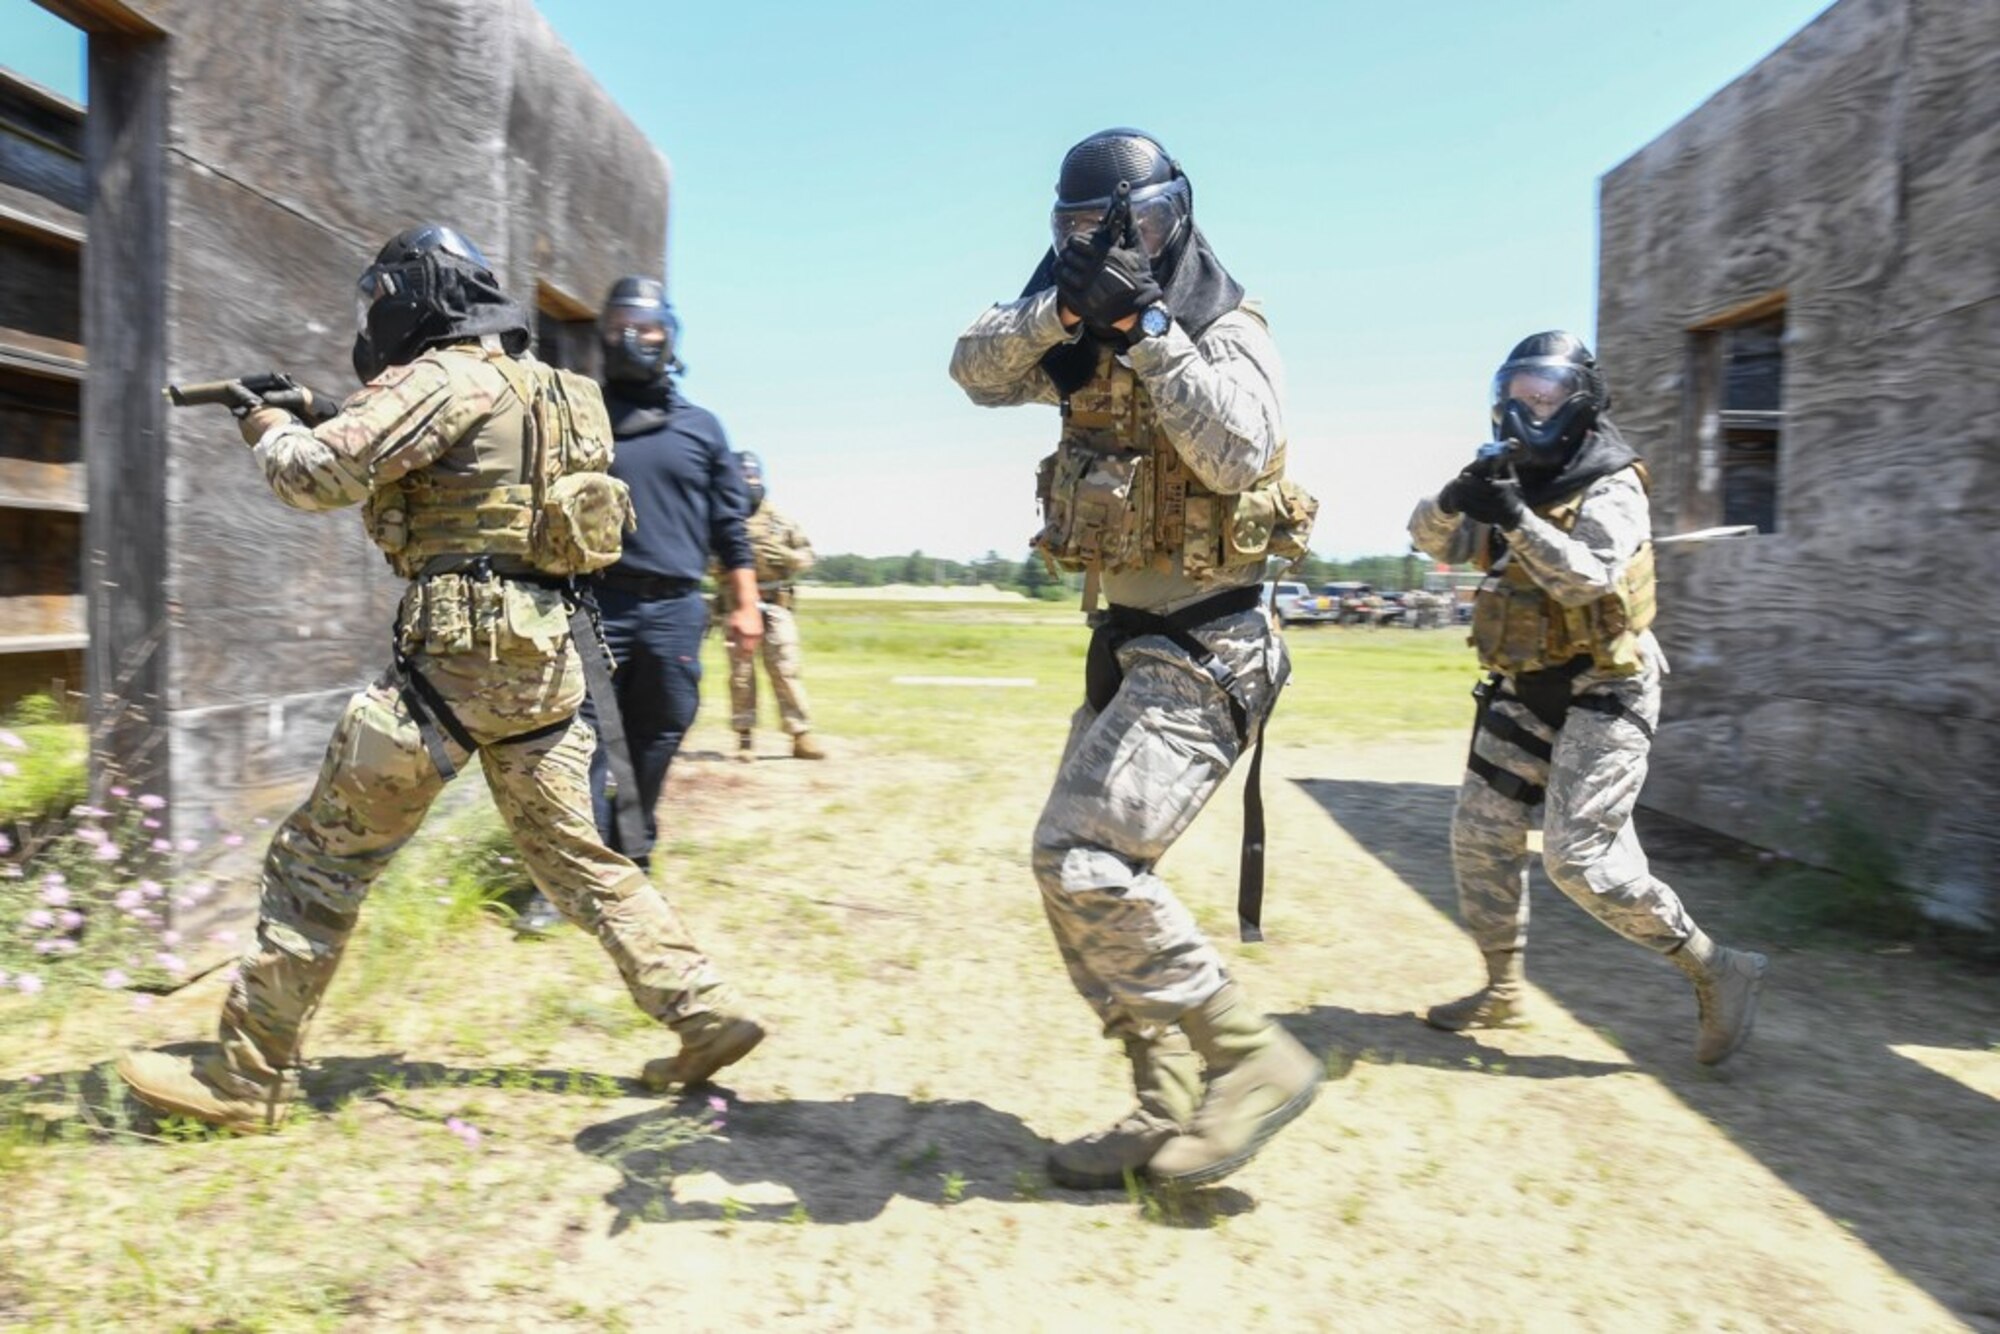 Senior Airman Ajay Cease, from left, Airman 1st Class Carlos Laboy Colon, and Airman Carolyn Raymond, members of the 66th Security Forces Squadron, participate in an active shooter exercise at Fort Devens, Mass., July 14. 66 SFS personnel participated in the training exercise to evaluate the installation’s readiness and emergency response capabilities. (U.S. Air Force photo by Todd Maki)